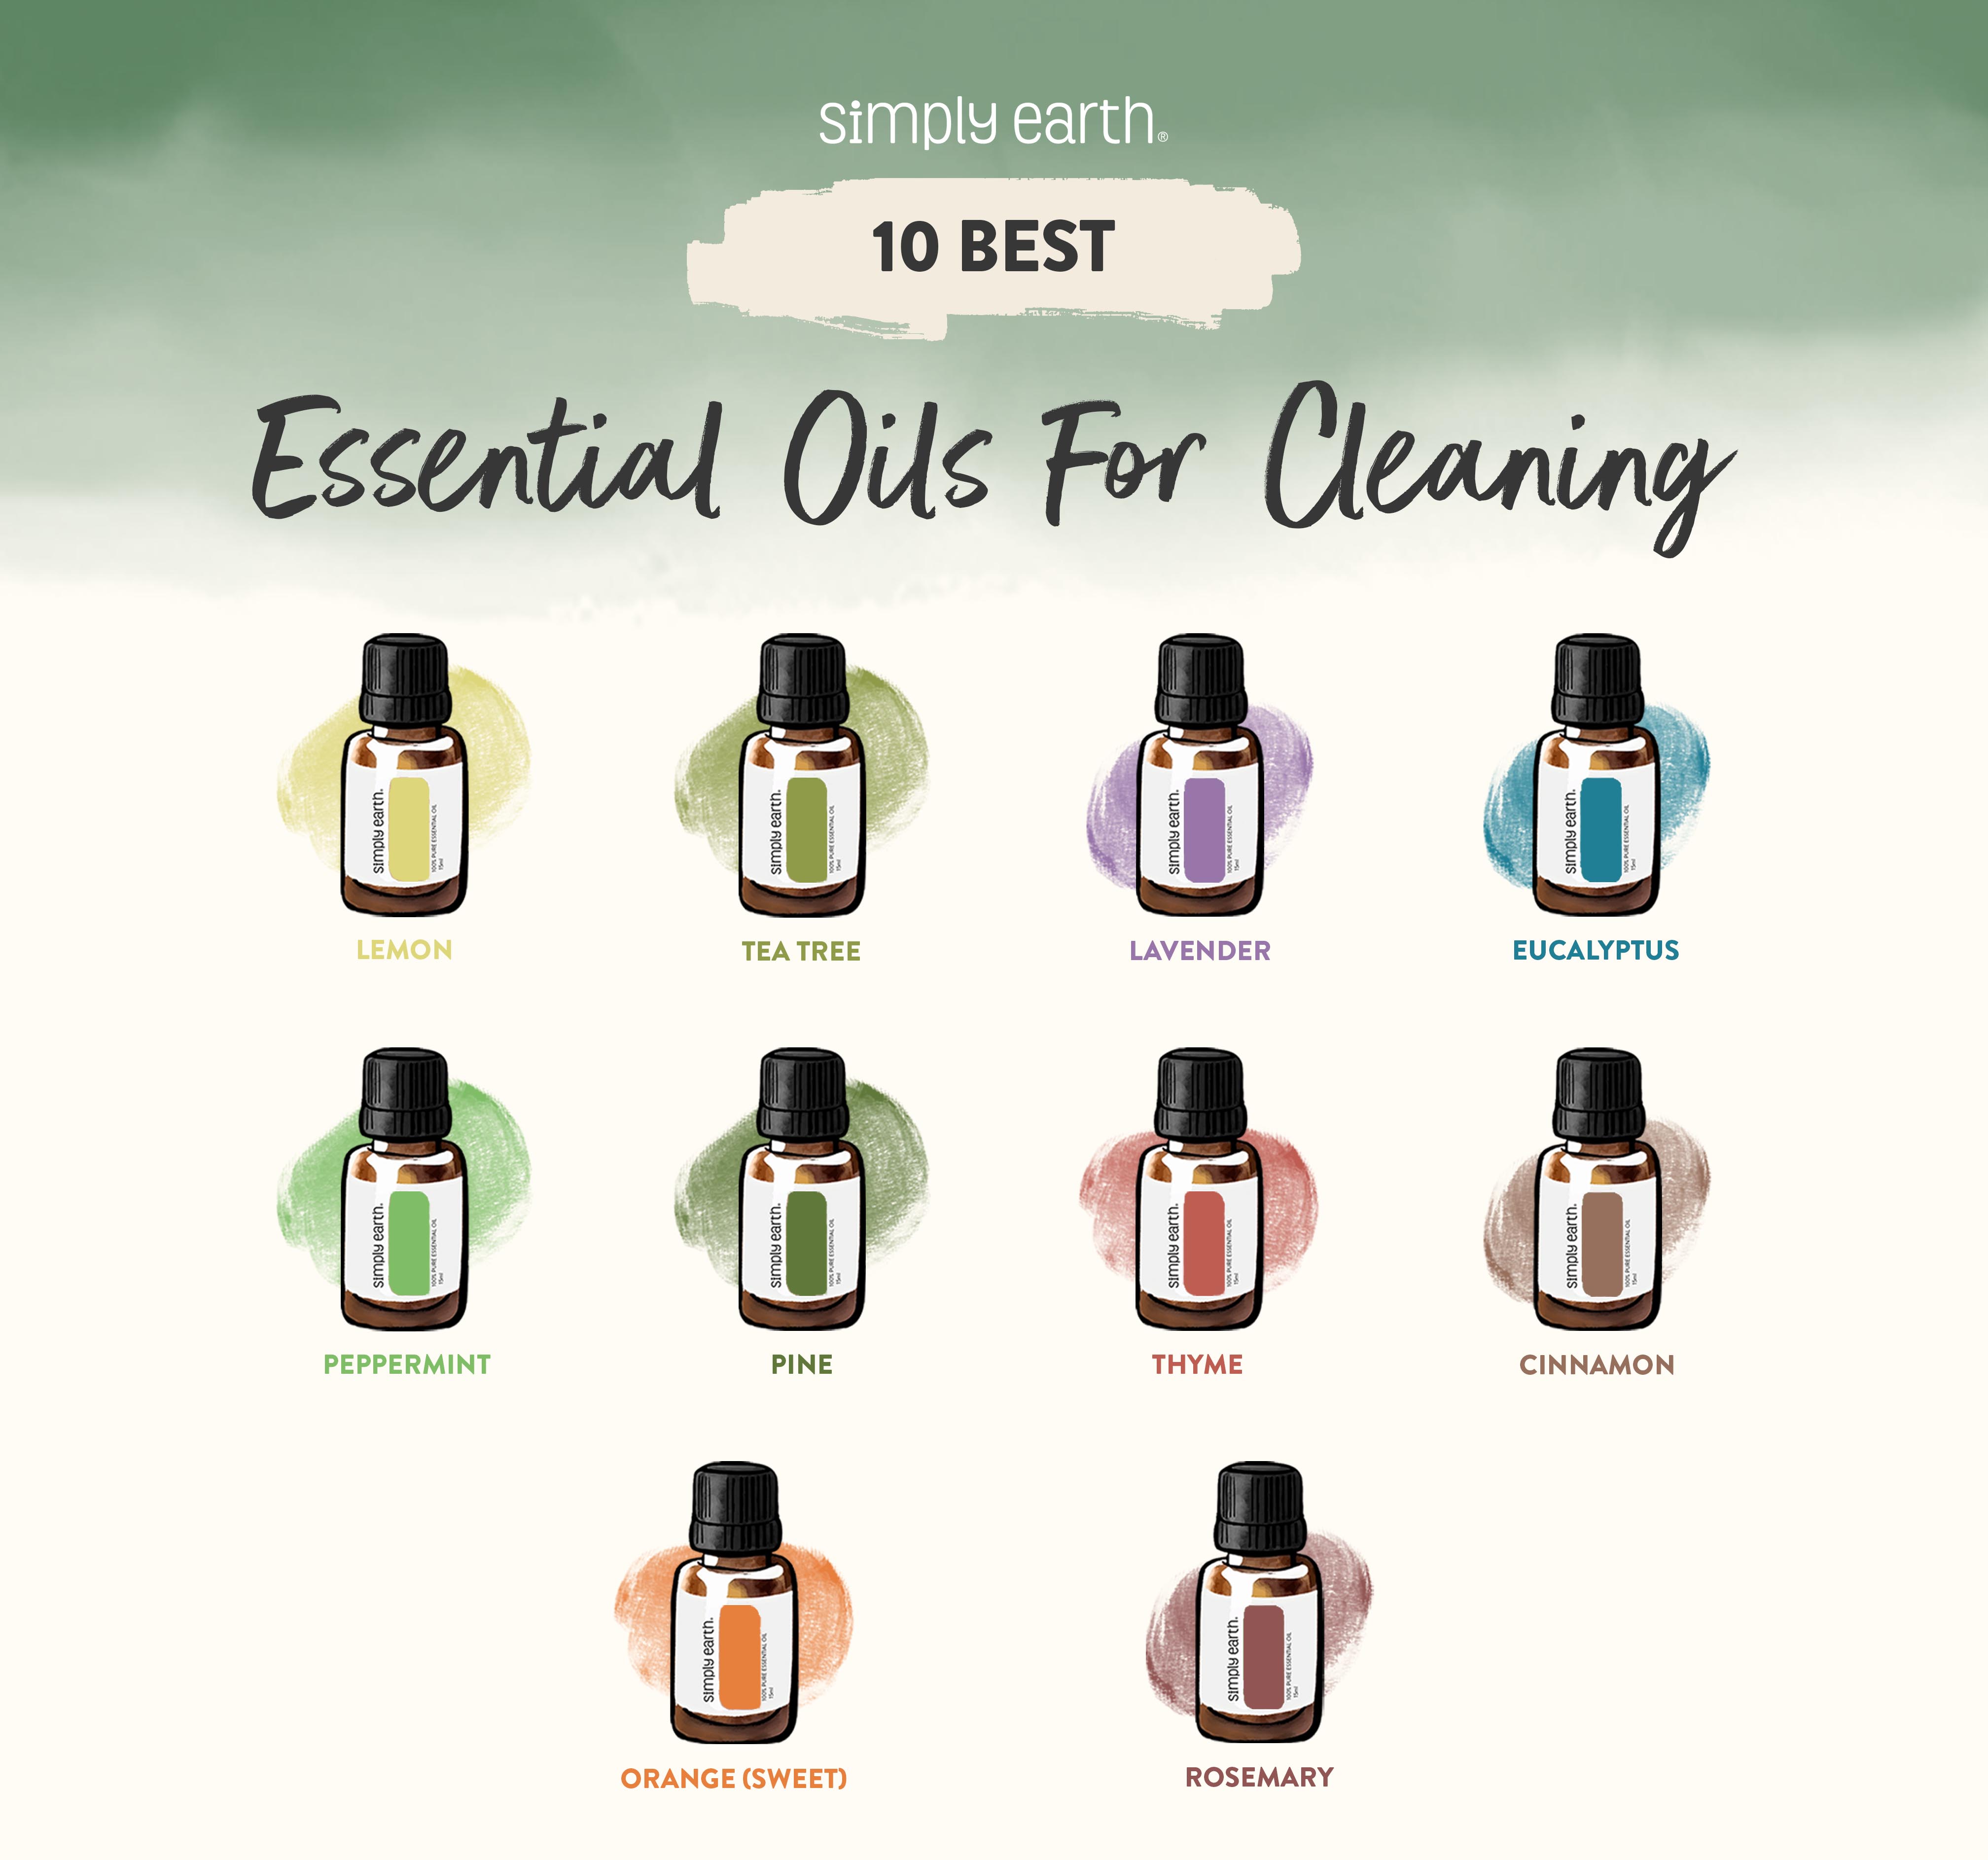 8 Best Earthy Essential Oils - List of Earthy Scented Oils – VedaOils